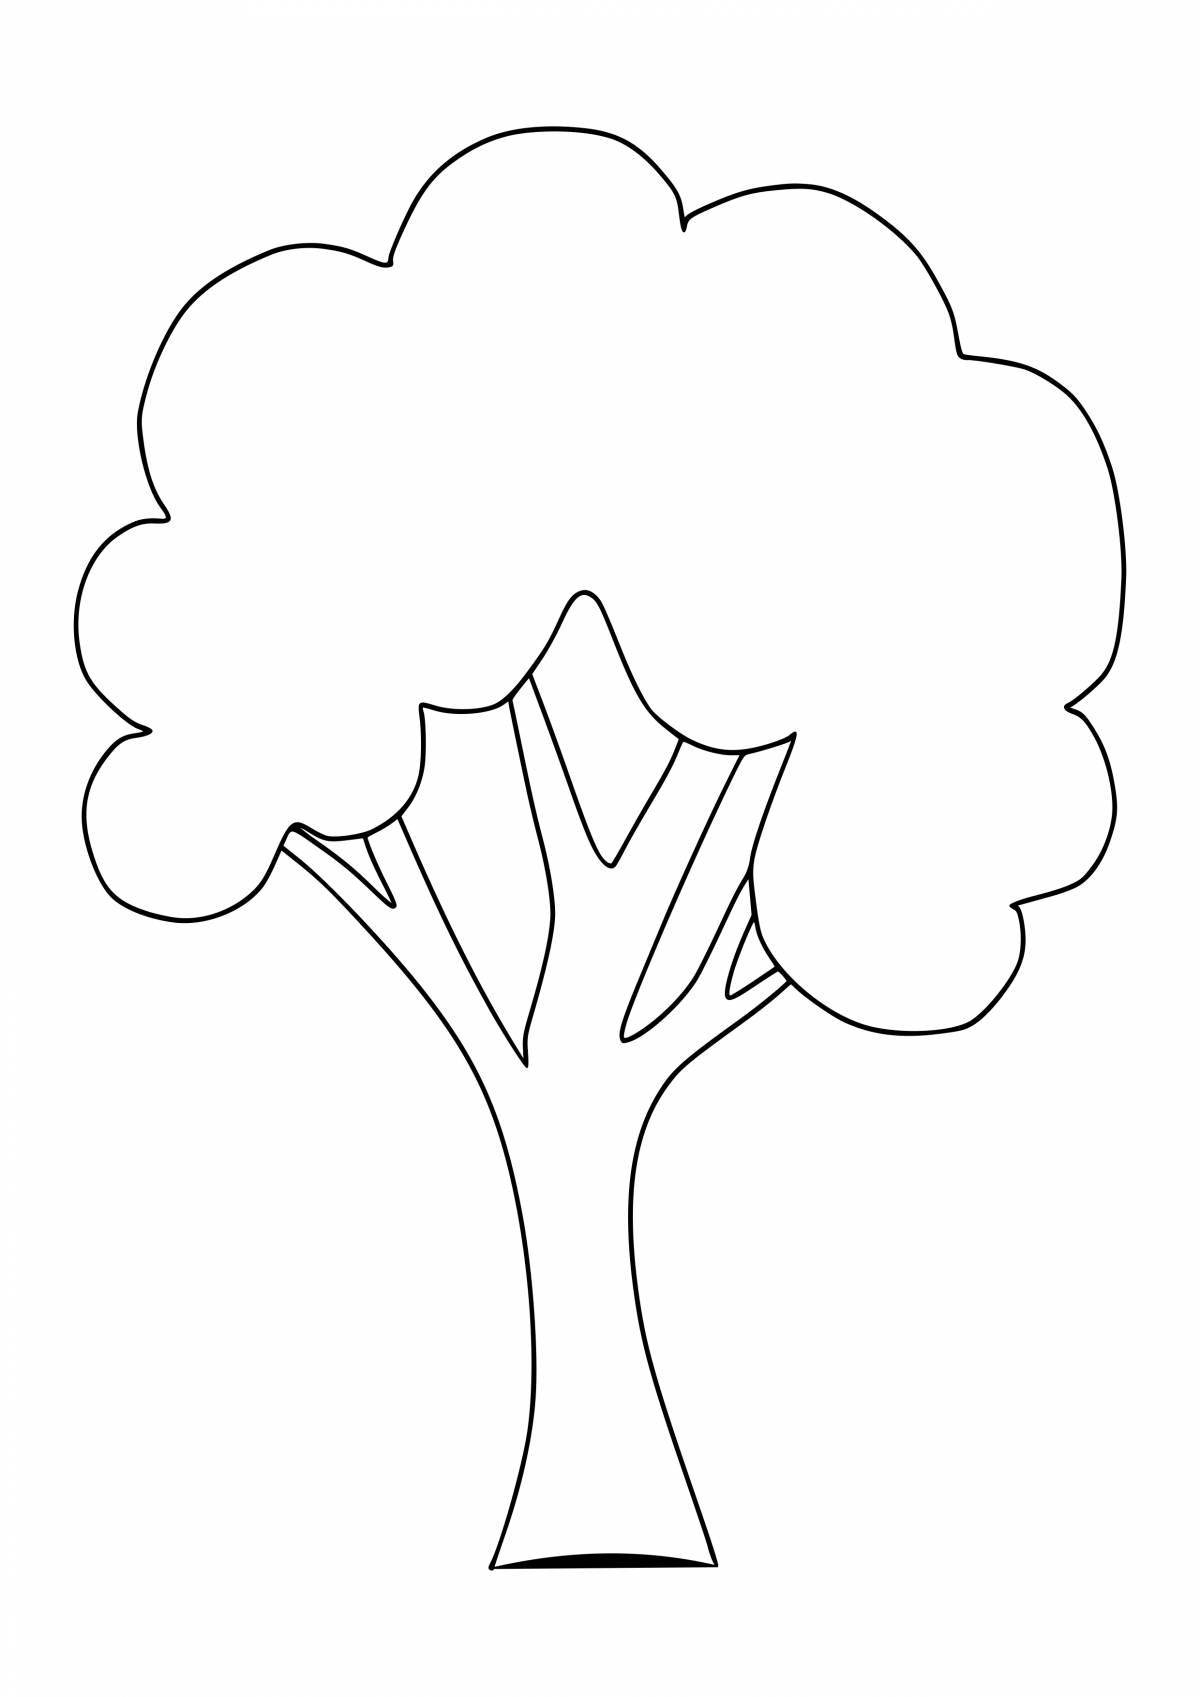 Majestic tree silhouette coloring page